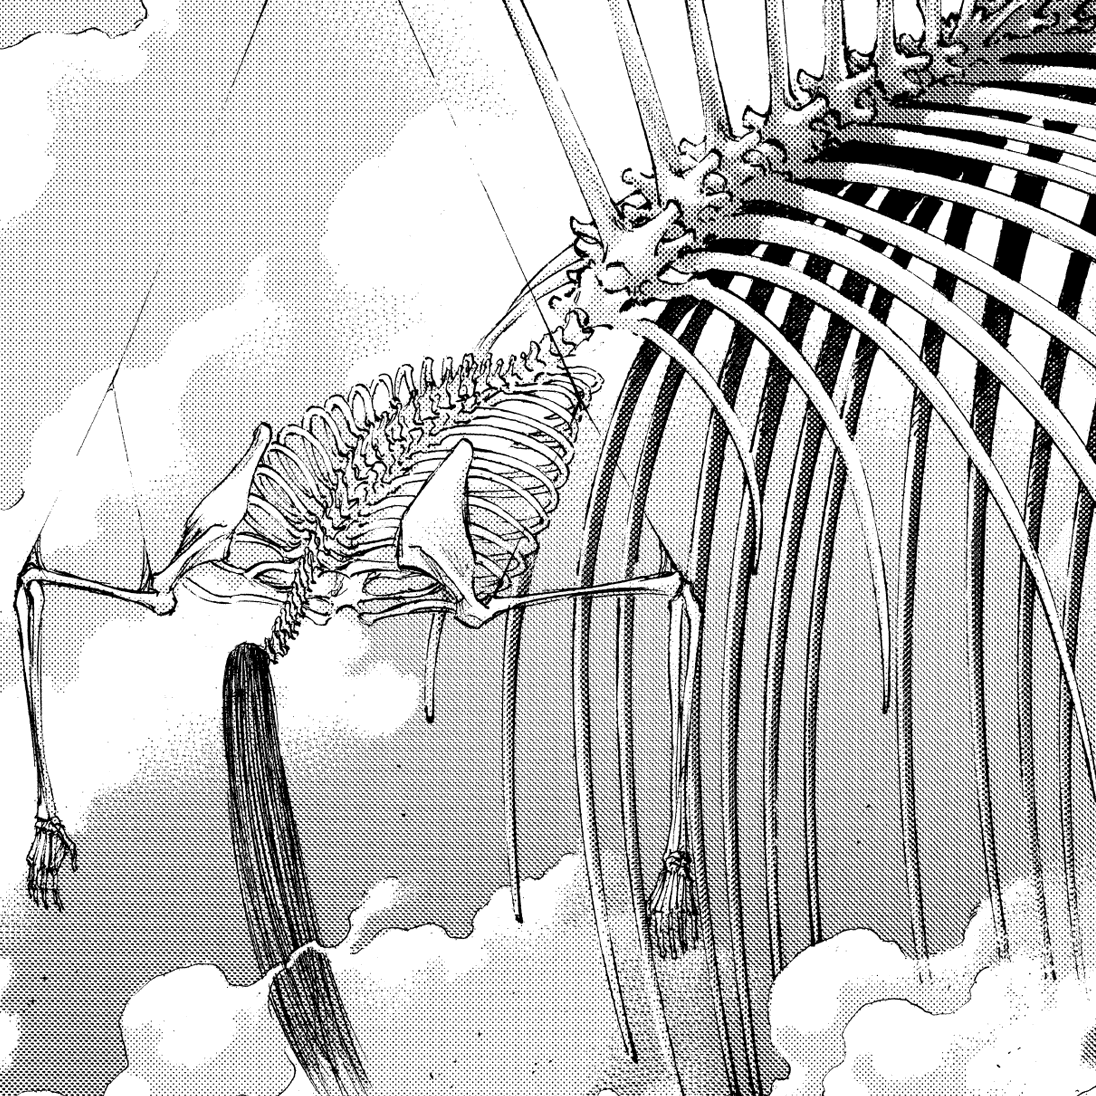 whats the chances of the scene not shown Eren inside the titan but  somewhere else  the manga one shows more details like his neck but the  anime one just very dark